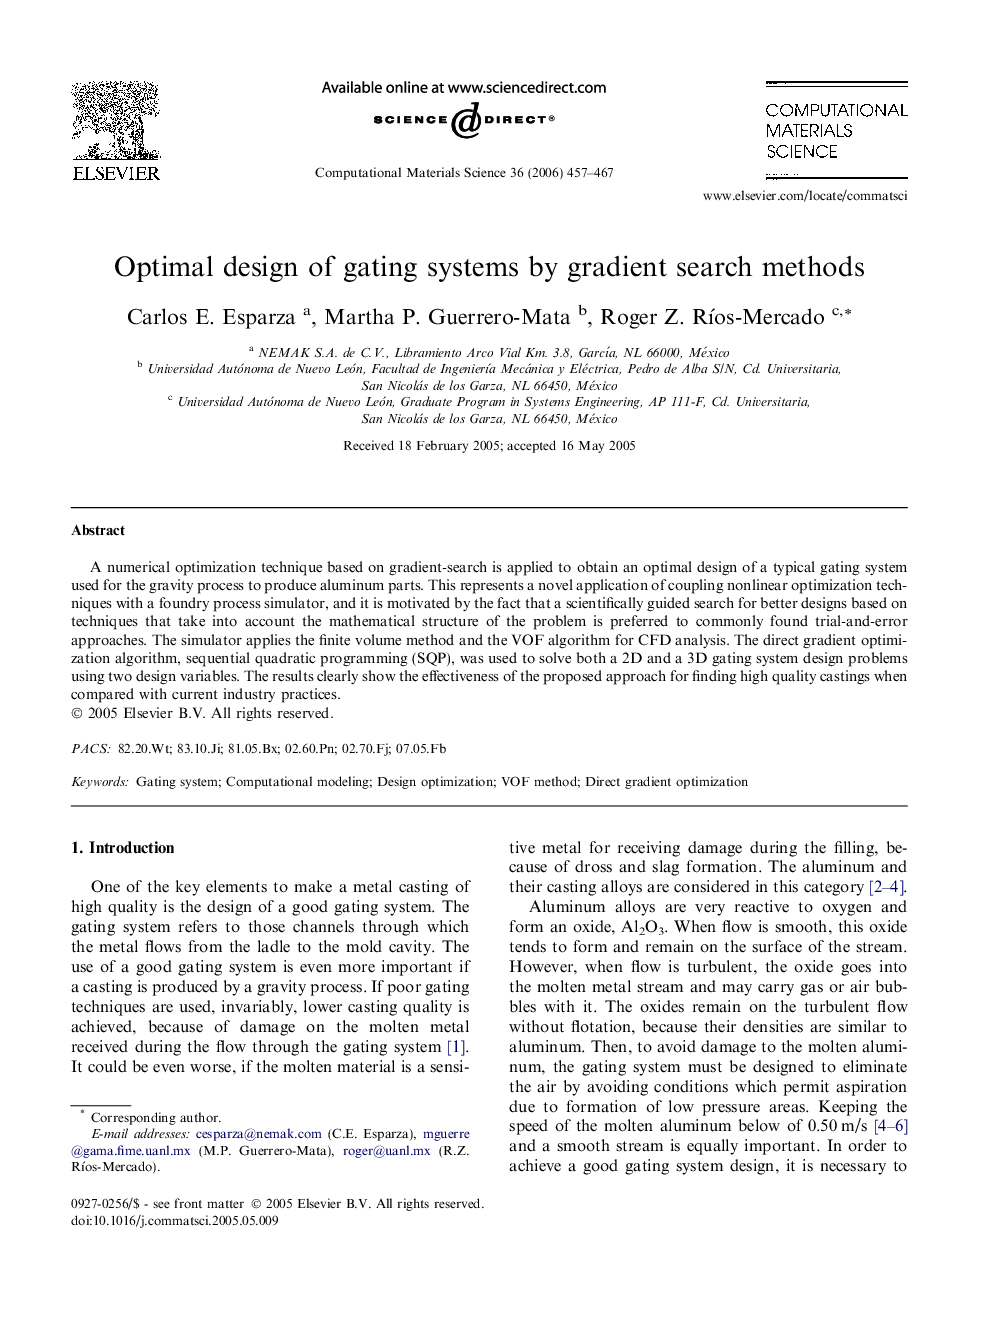 Optimal design of gating systems by gradient search methods